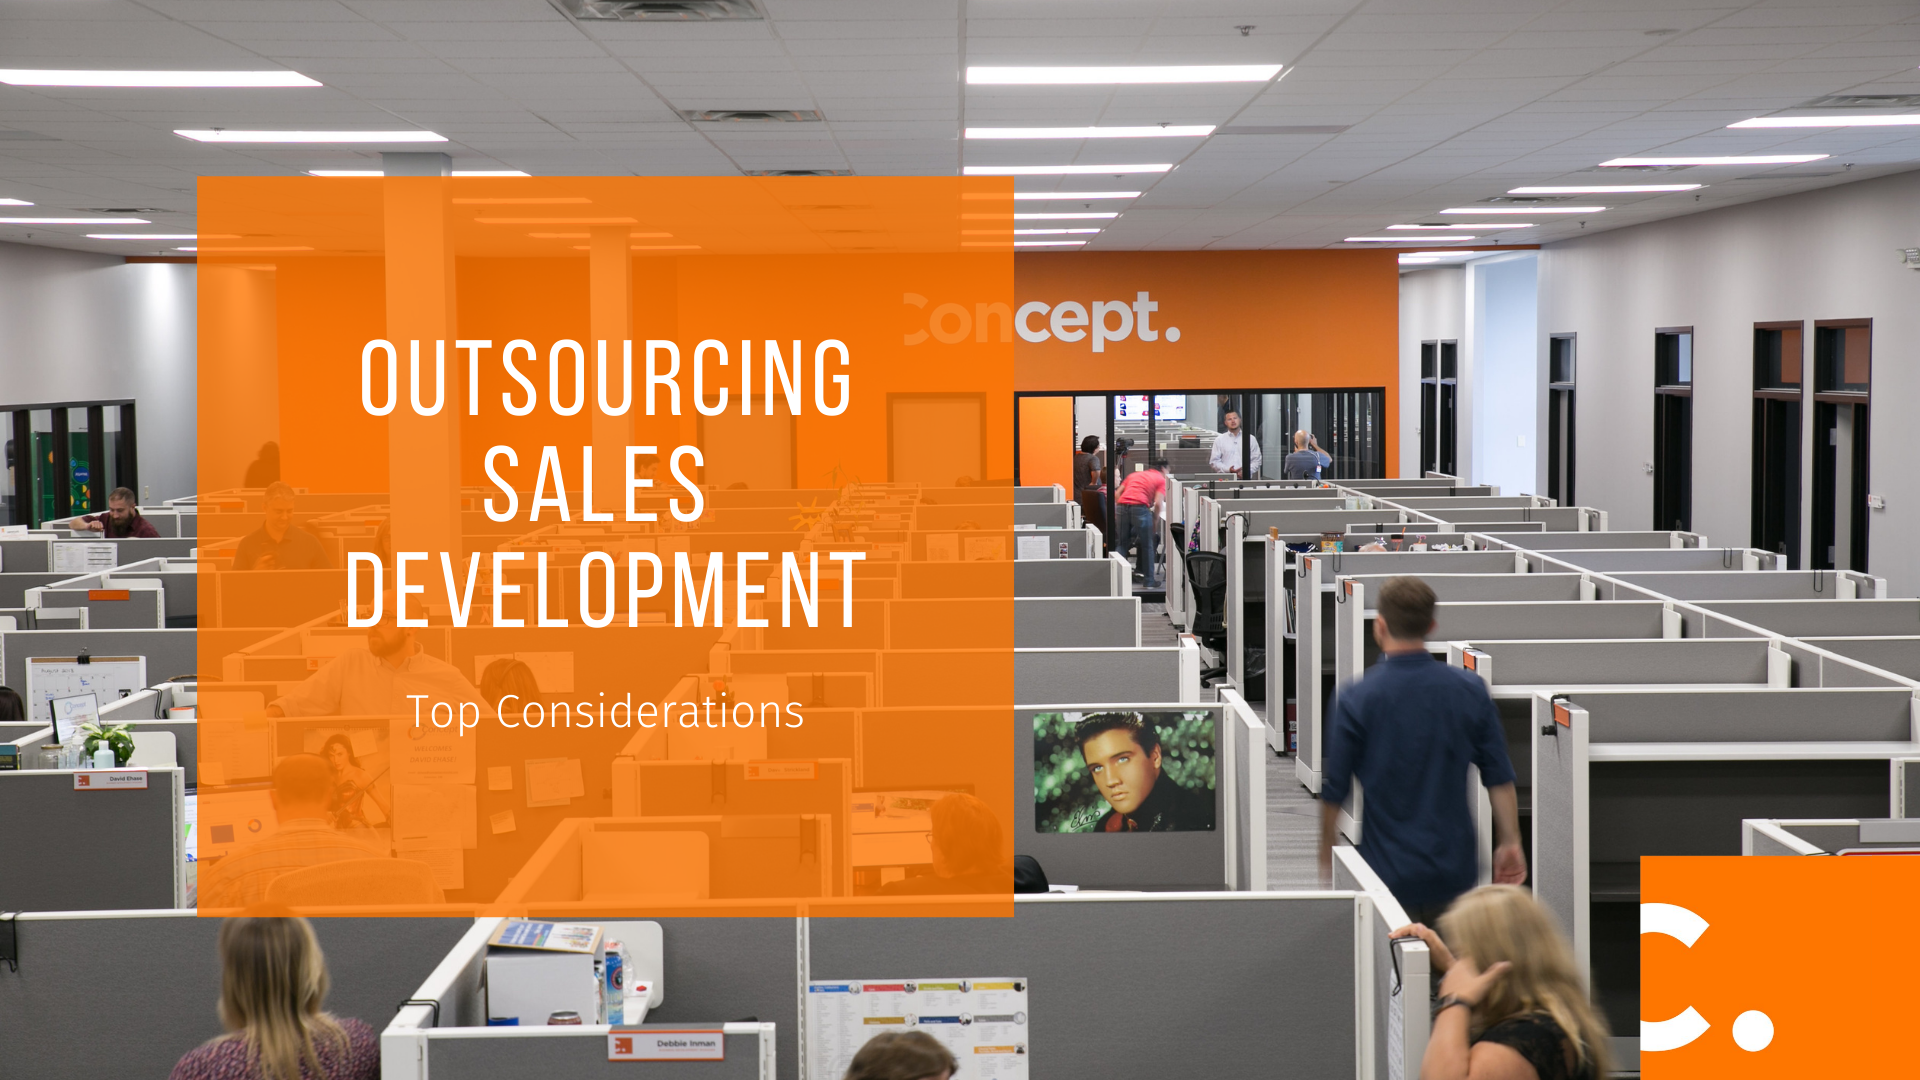 Top considerations when looking to outsource sales development services